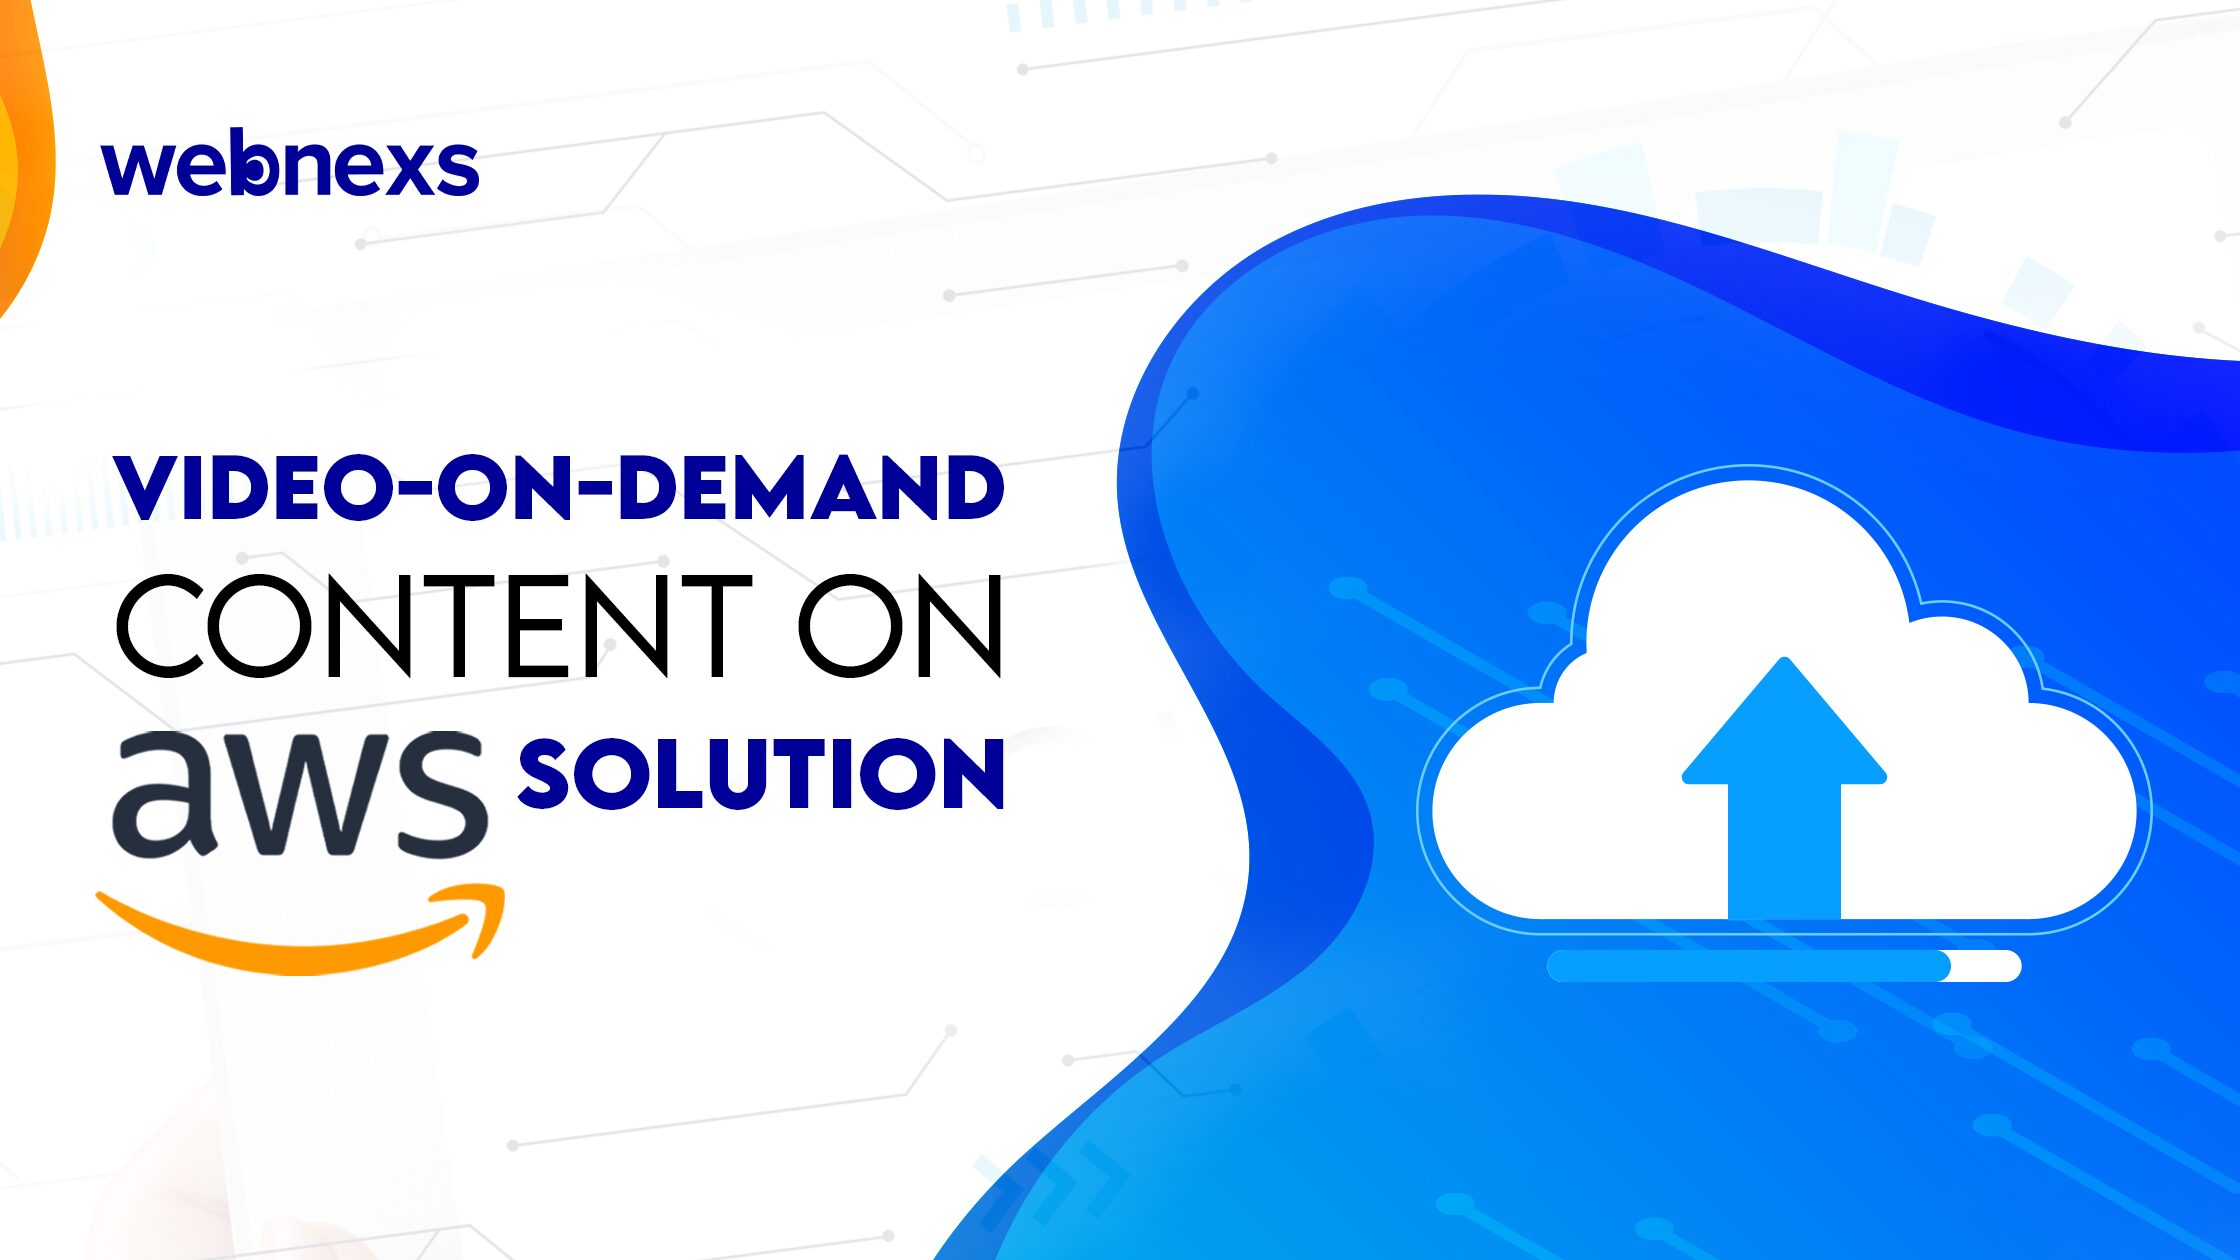 Video-On-Demand content on AWS solution